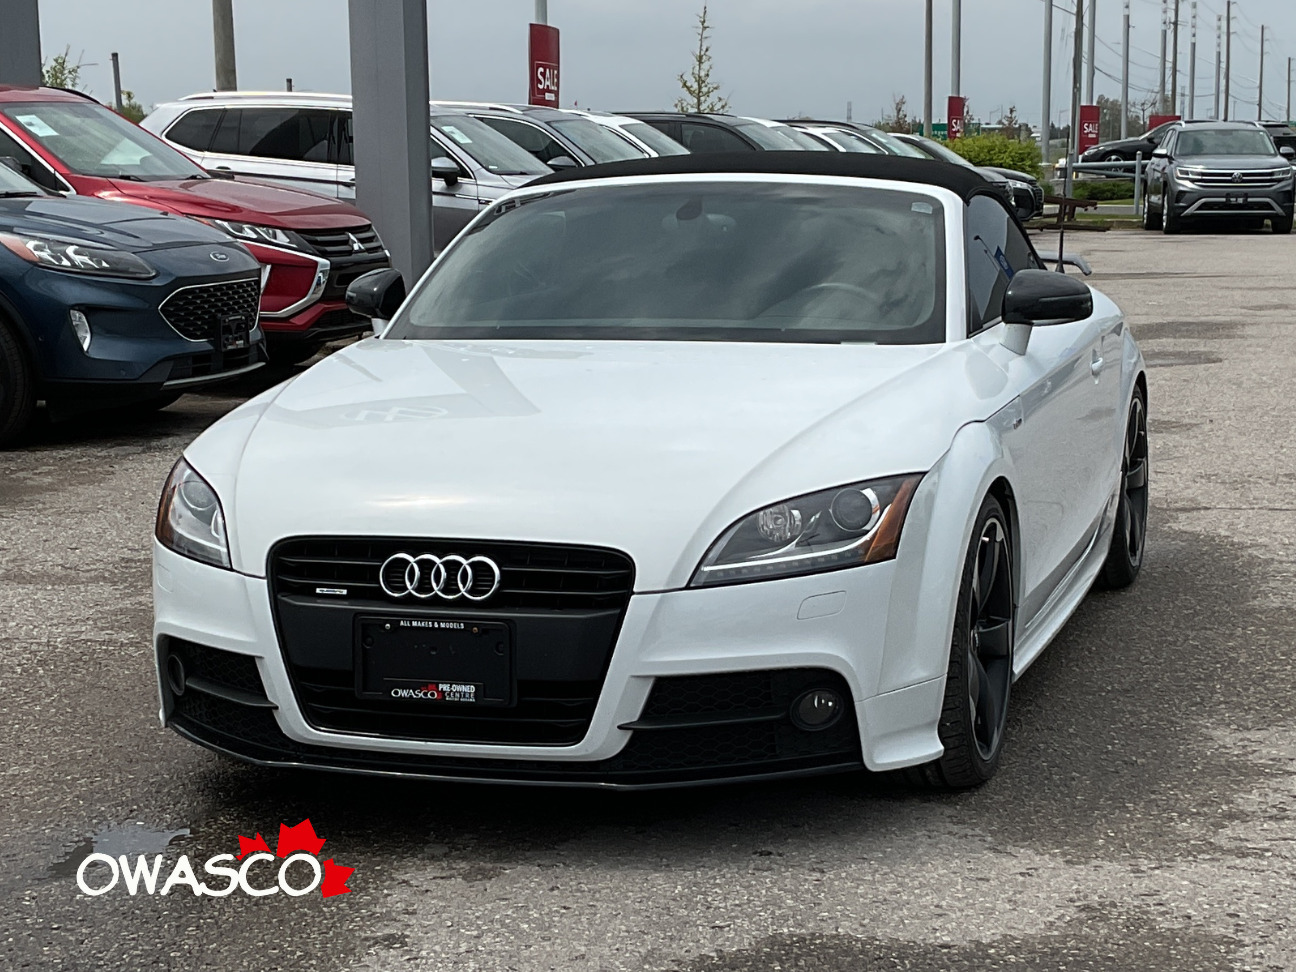 2014 Audi TT 2.0L Leather! Fully Certified! New Tires!